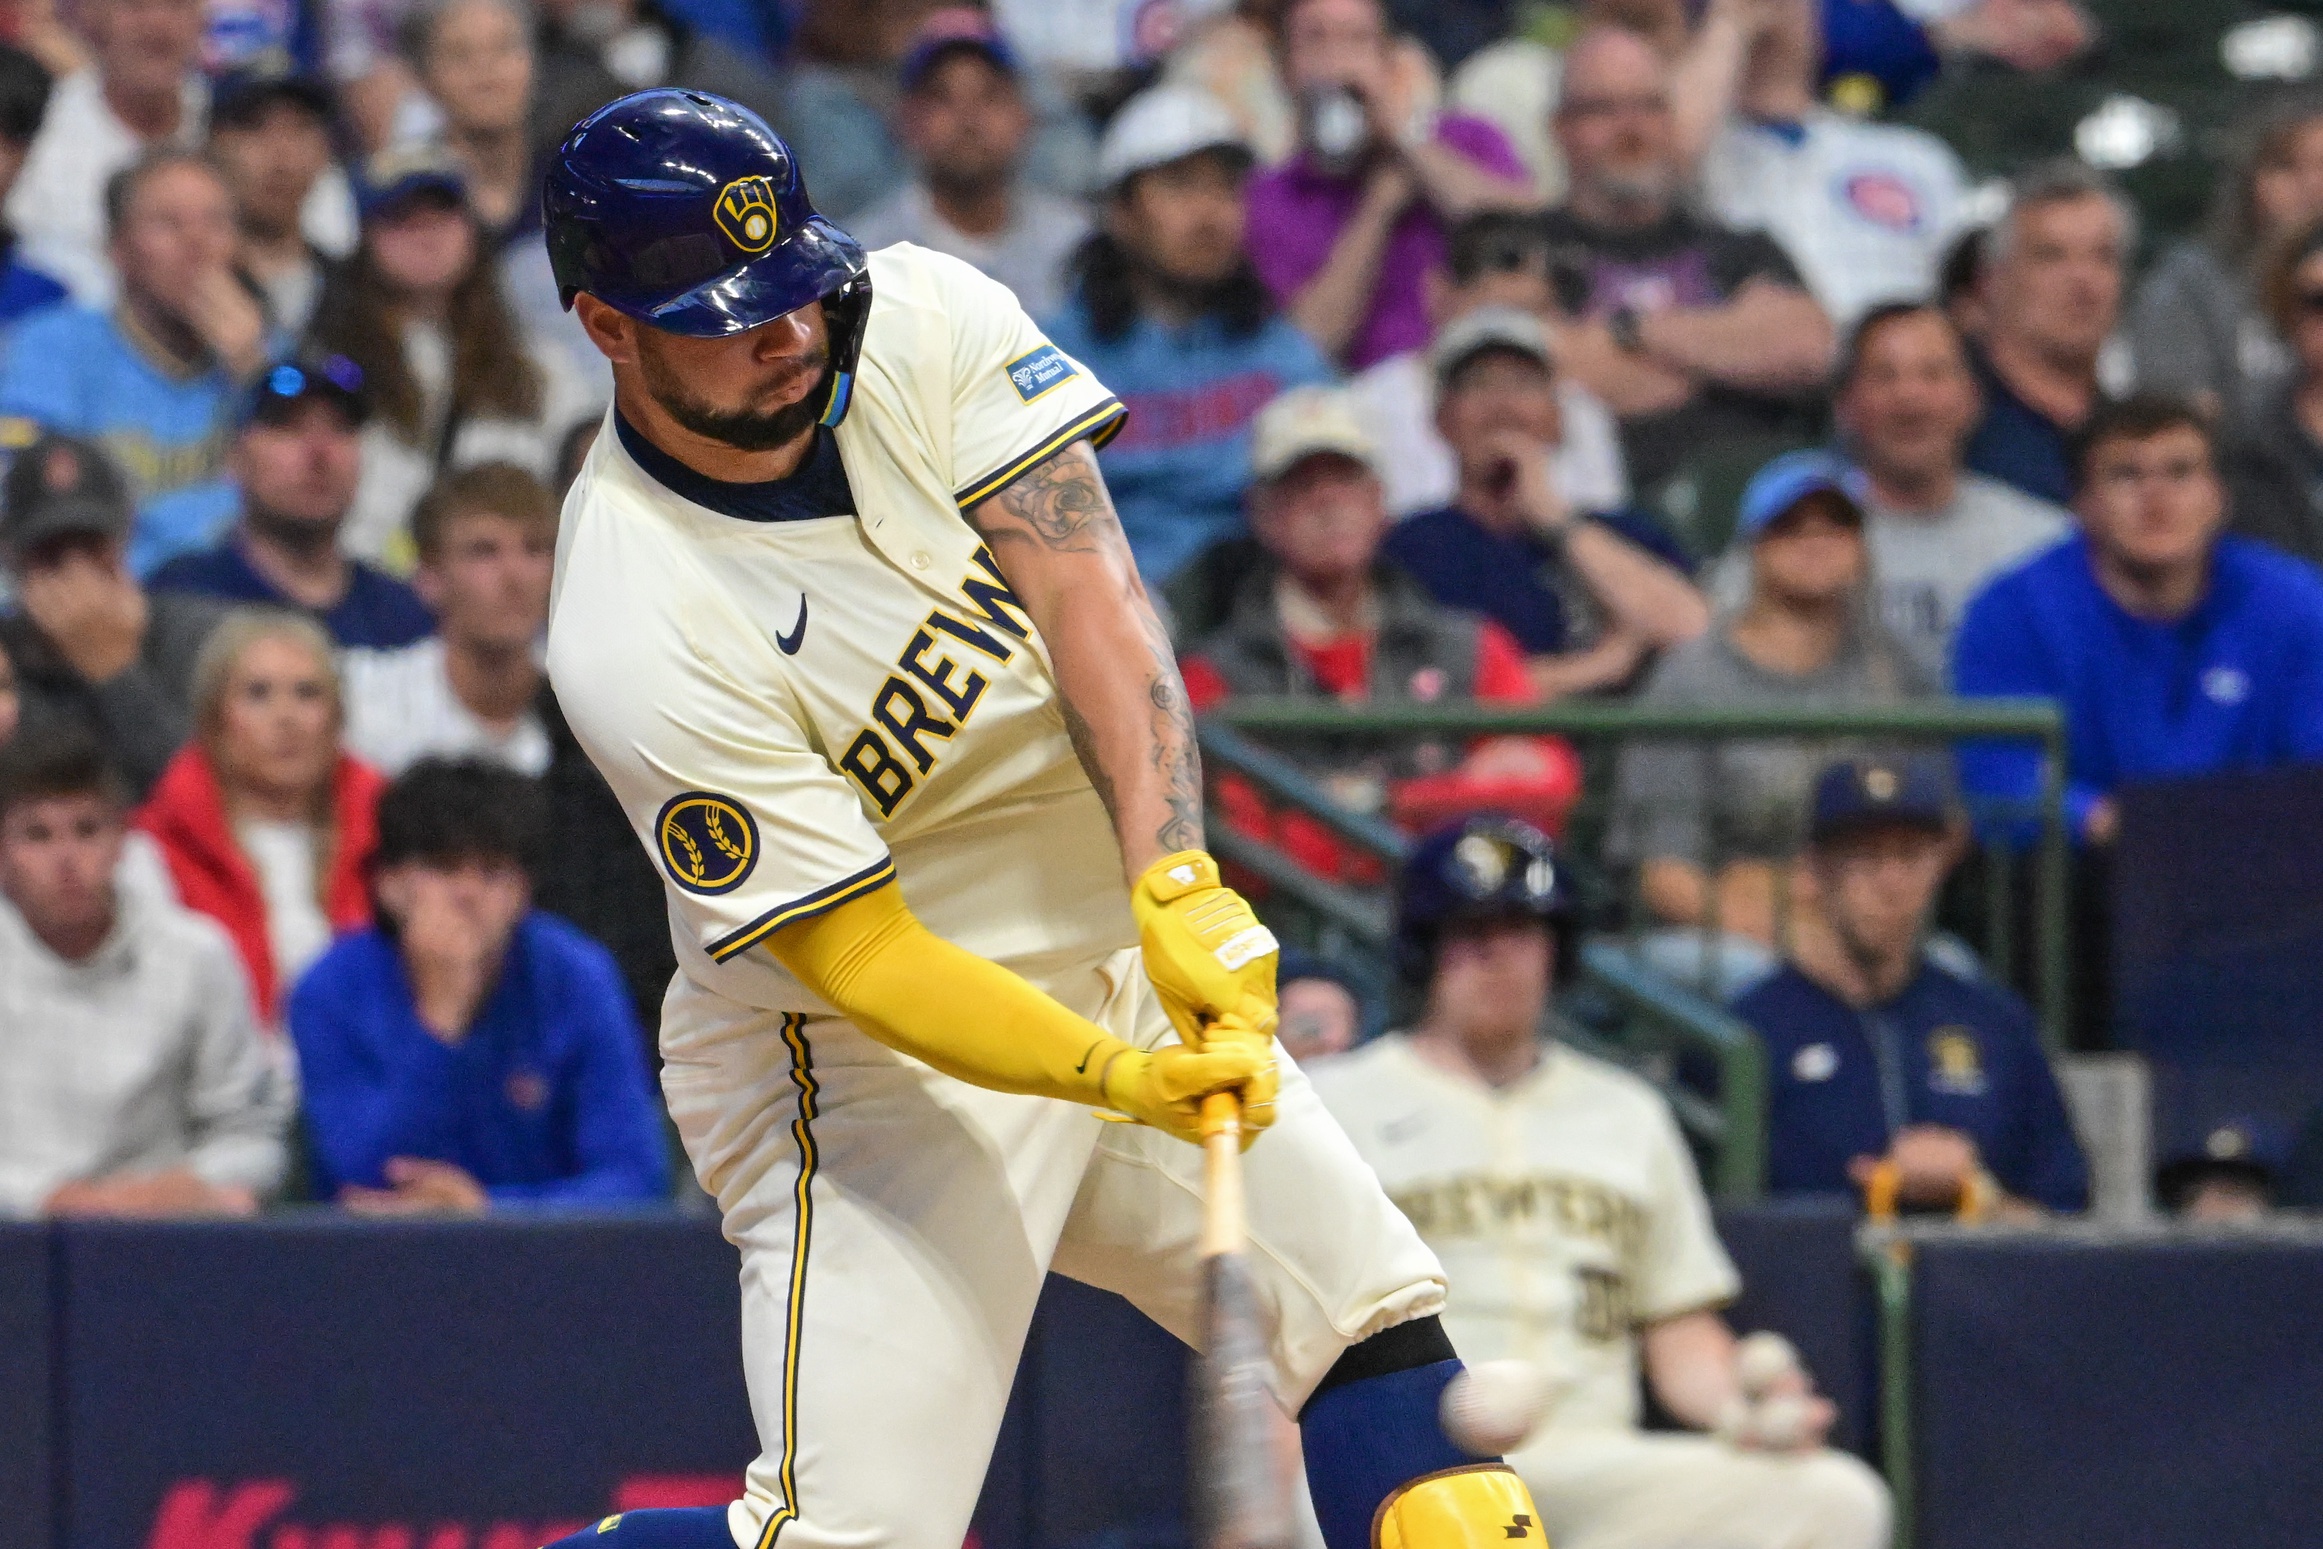 One Offseason Signing is Starting to Come Up Big for the Brewers